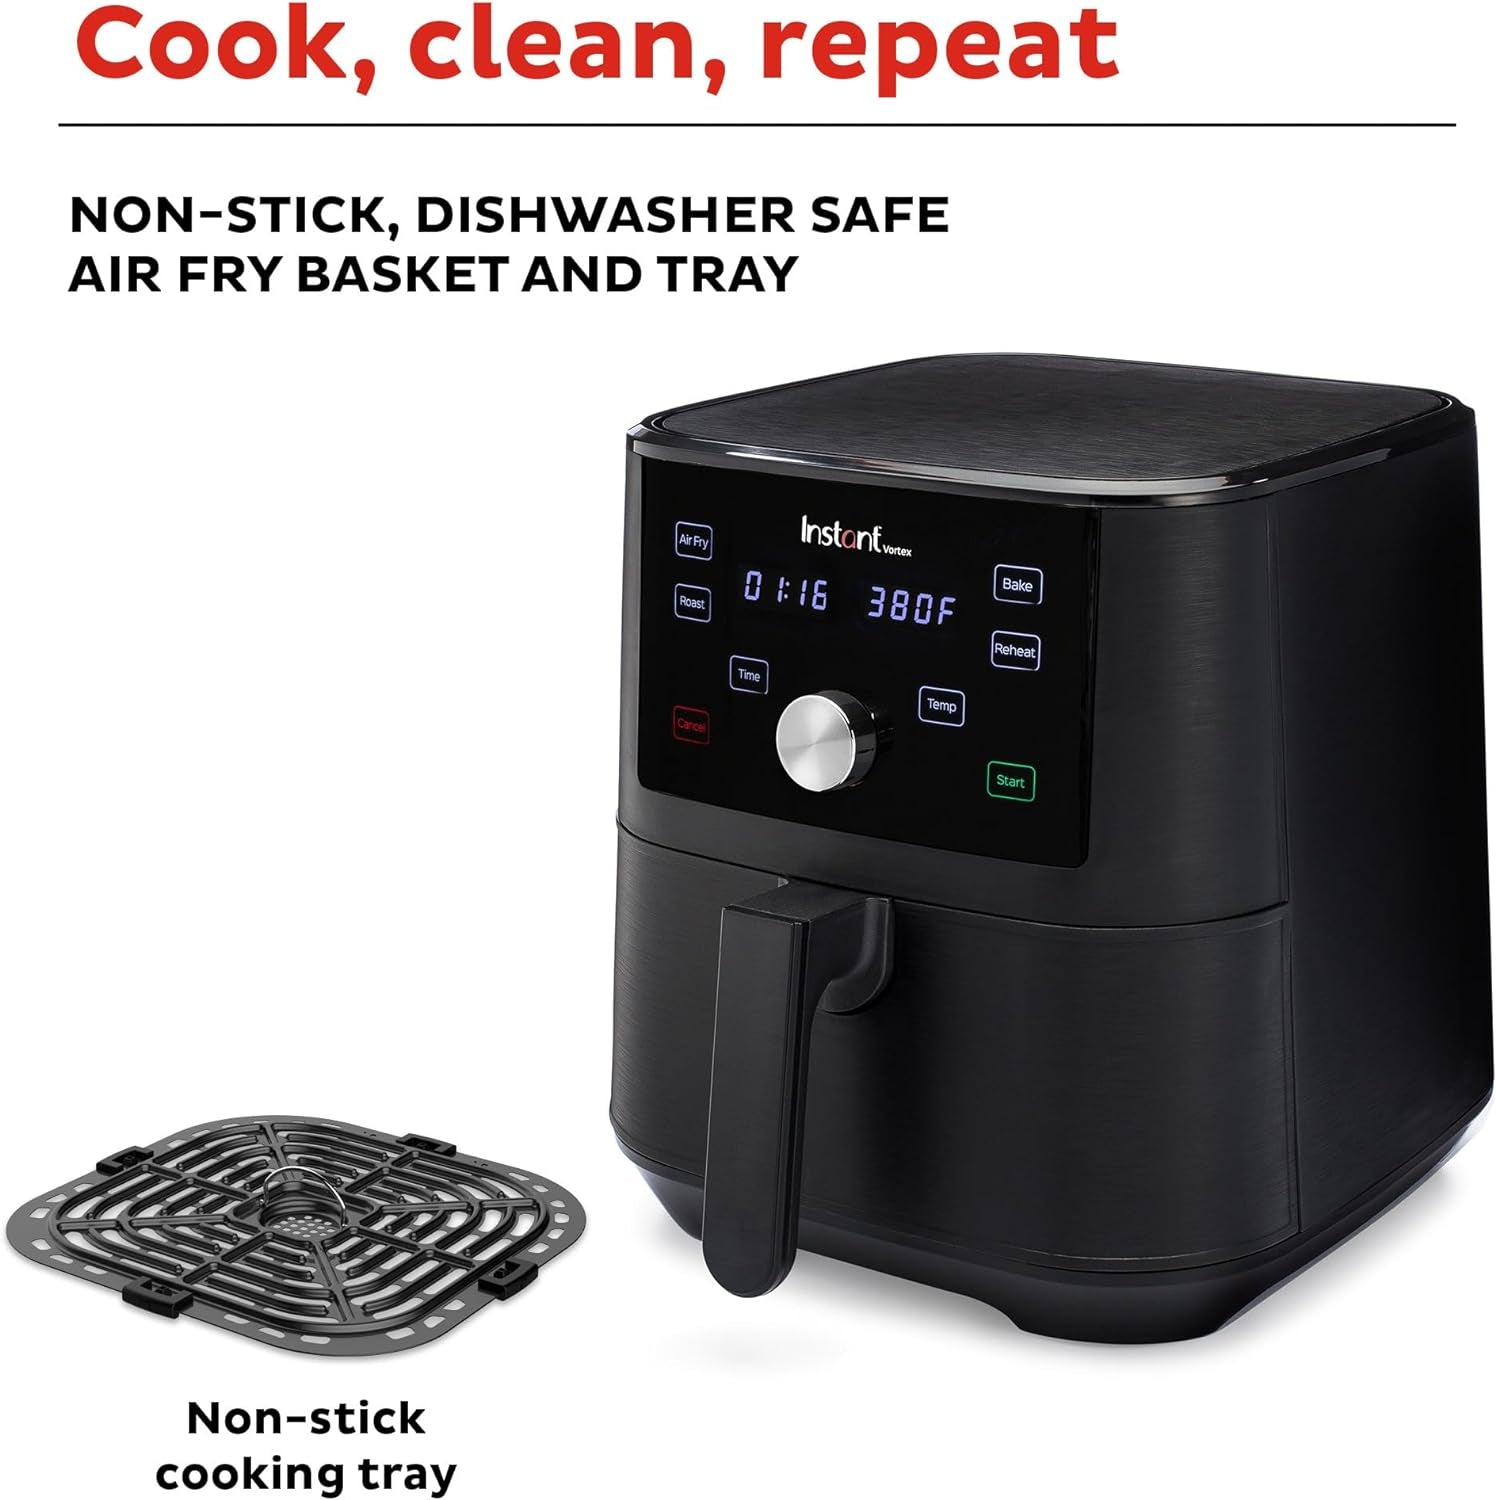 Instant Vortex 6QT XL Air Fryer, 4-In-1 Functions That Crisps, Roasts, Reheats, Bakes for Quick Easy Meals, 100+ In-App Recipes, Is Dishwasher-Safe, from the Makers of , Black